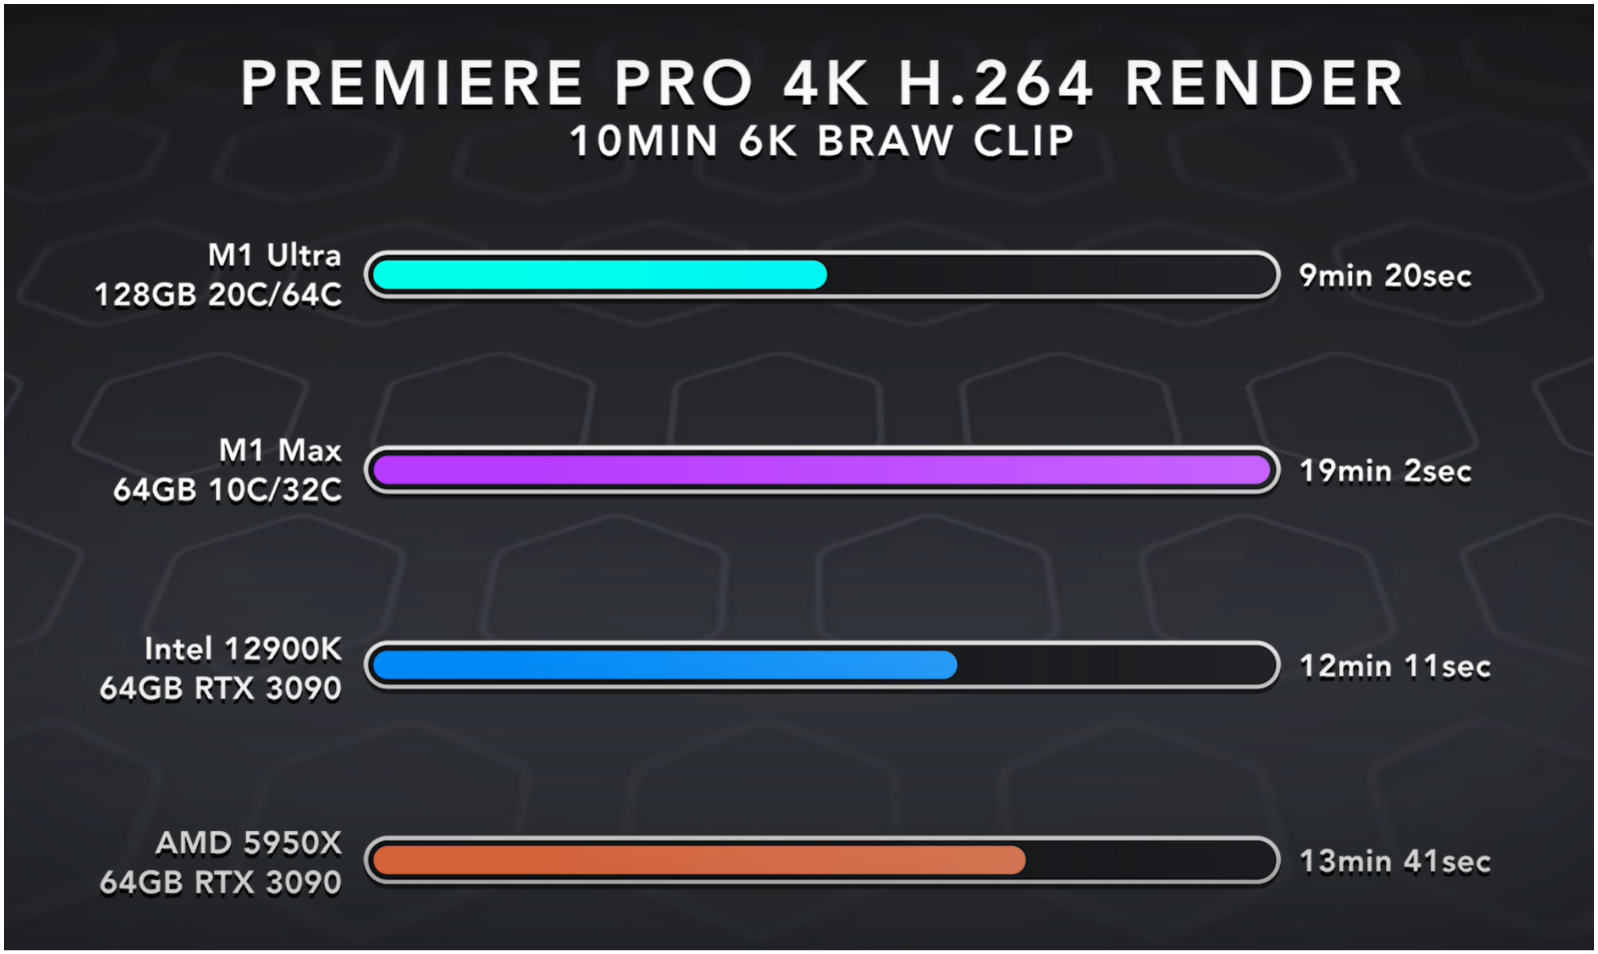 Premiere Pro Benchmark at 4K for M1 Ultra/Max, Intel 12900K/RTX3090 and AMD 5950X/RTX3090